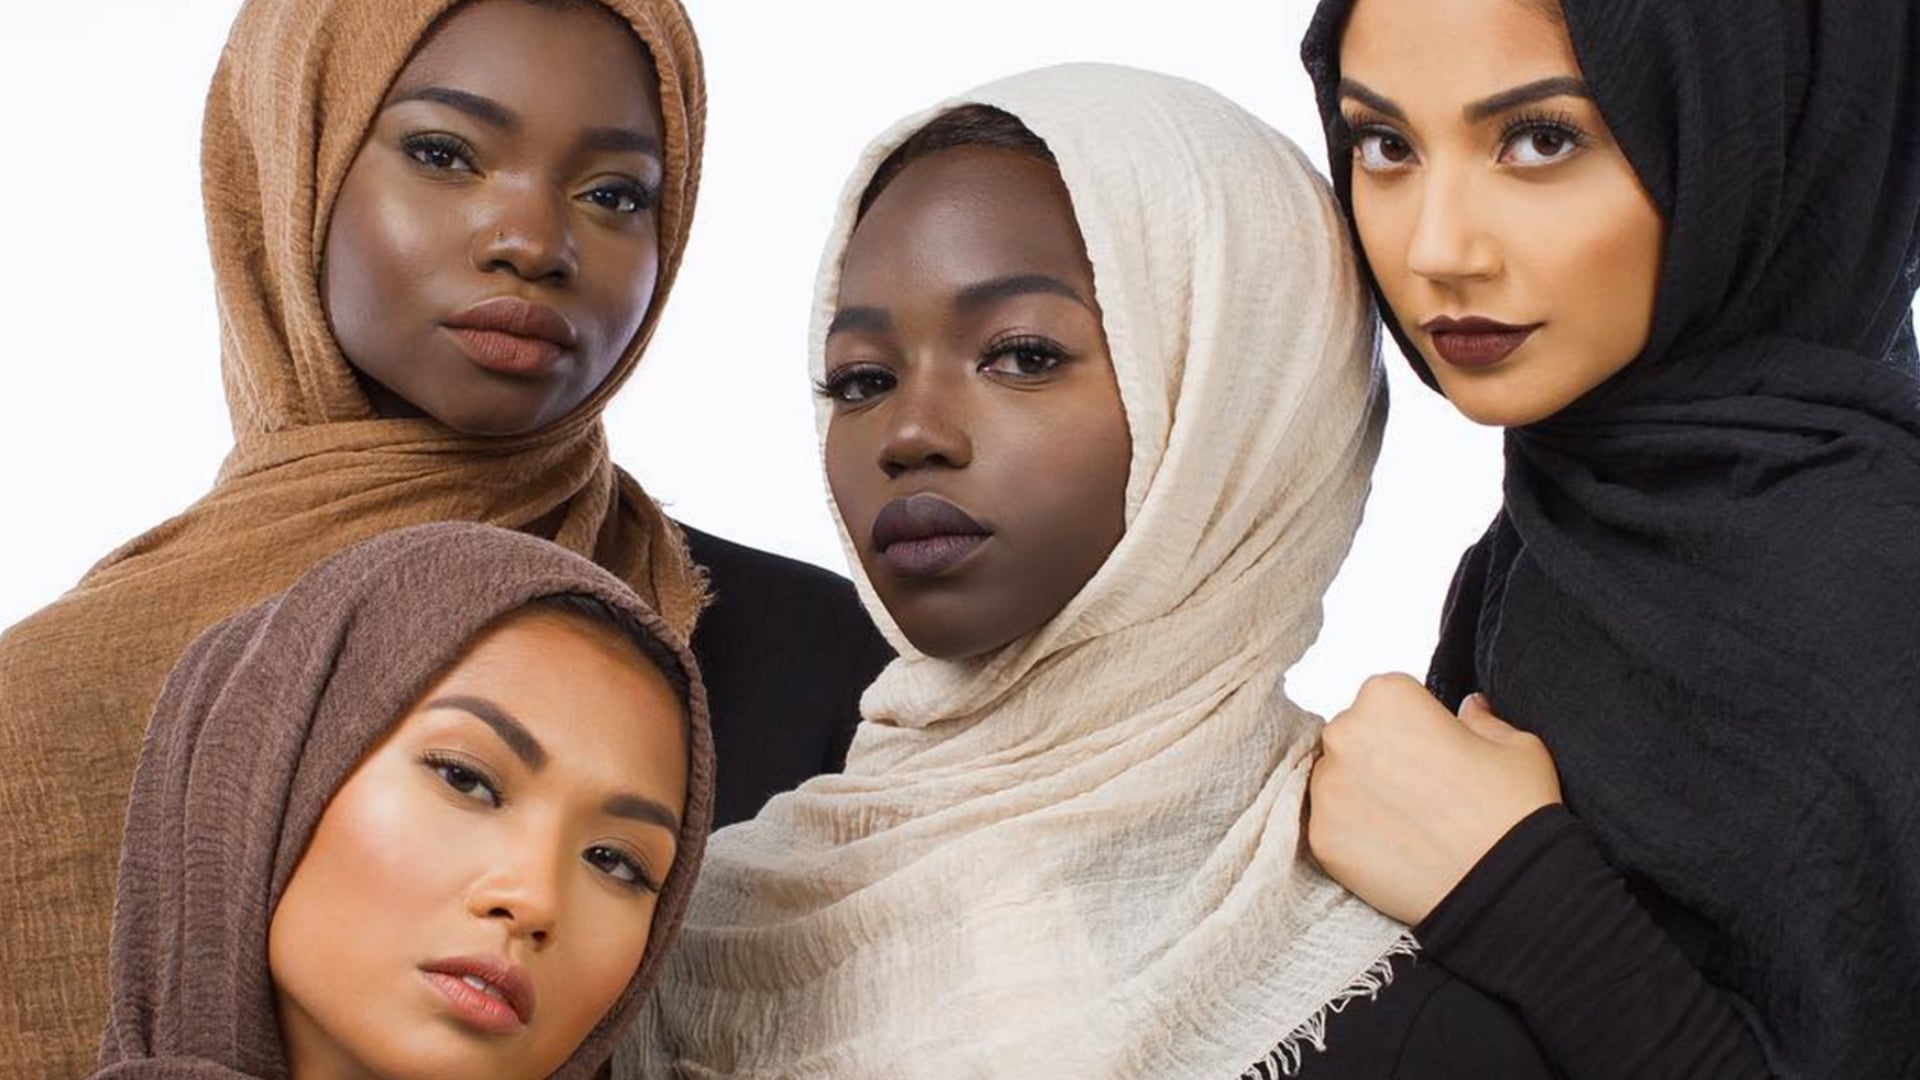 This New Line of Inclusive Hijabs Is Perfect For Every Skin Tone